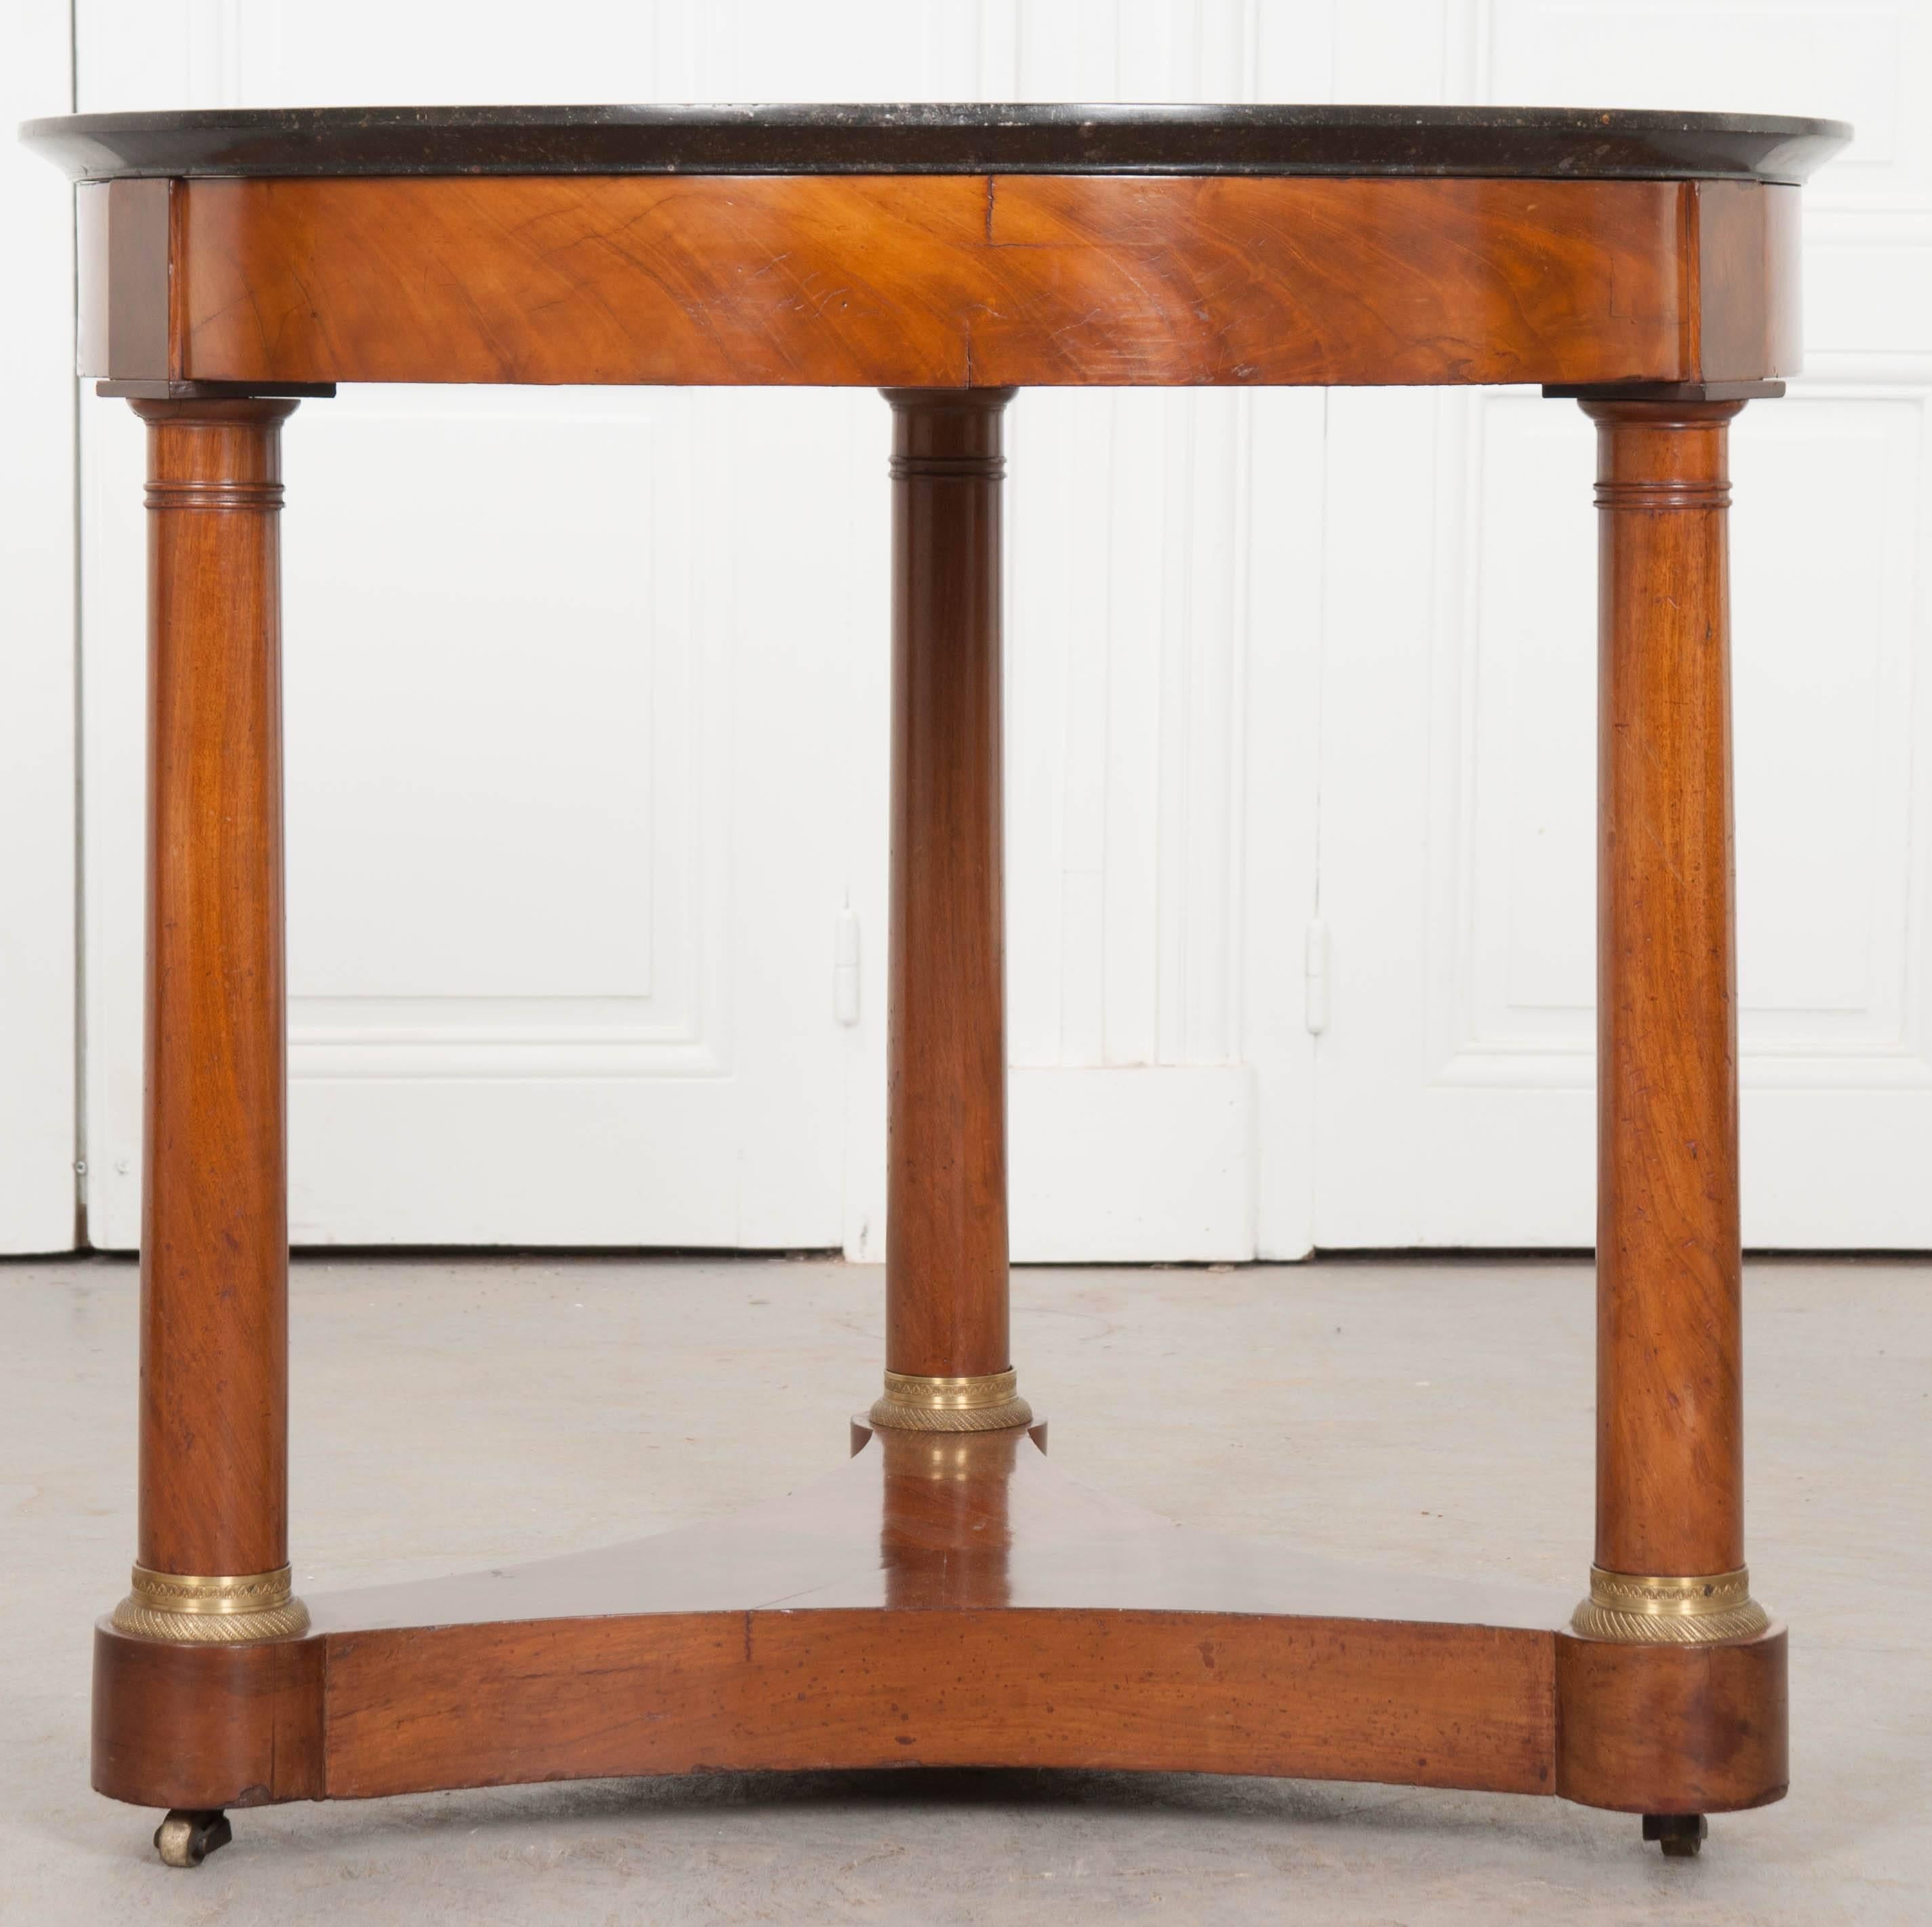 A rust-toned mahogany veneer has been artfully utilized in this stunning, 19th century French Gueridon. The table starts with an exceptional antique black fossil-marble top. A myriad of tiny creatures can be found in the stone, forever fossilized.